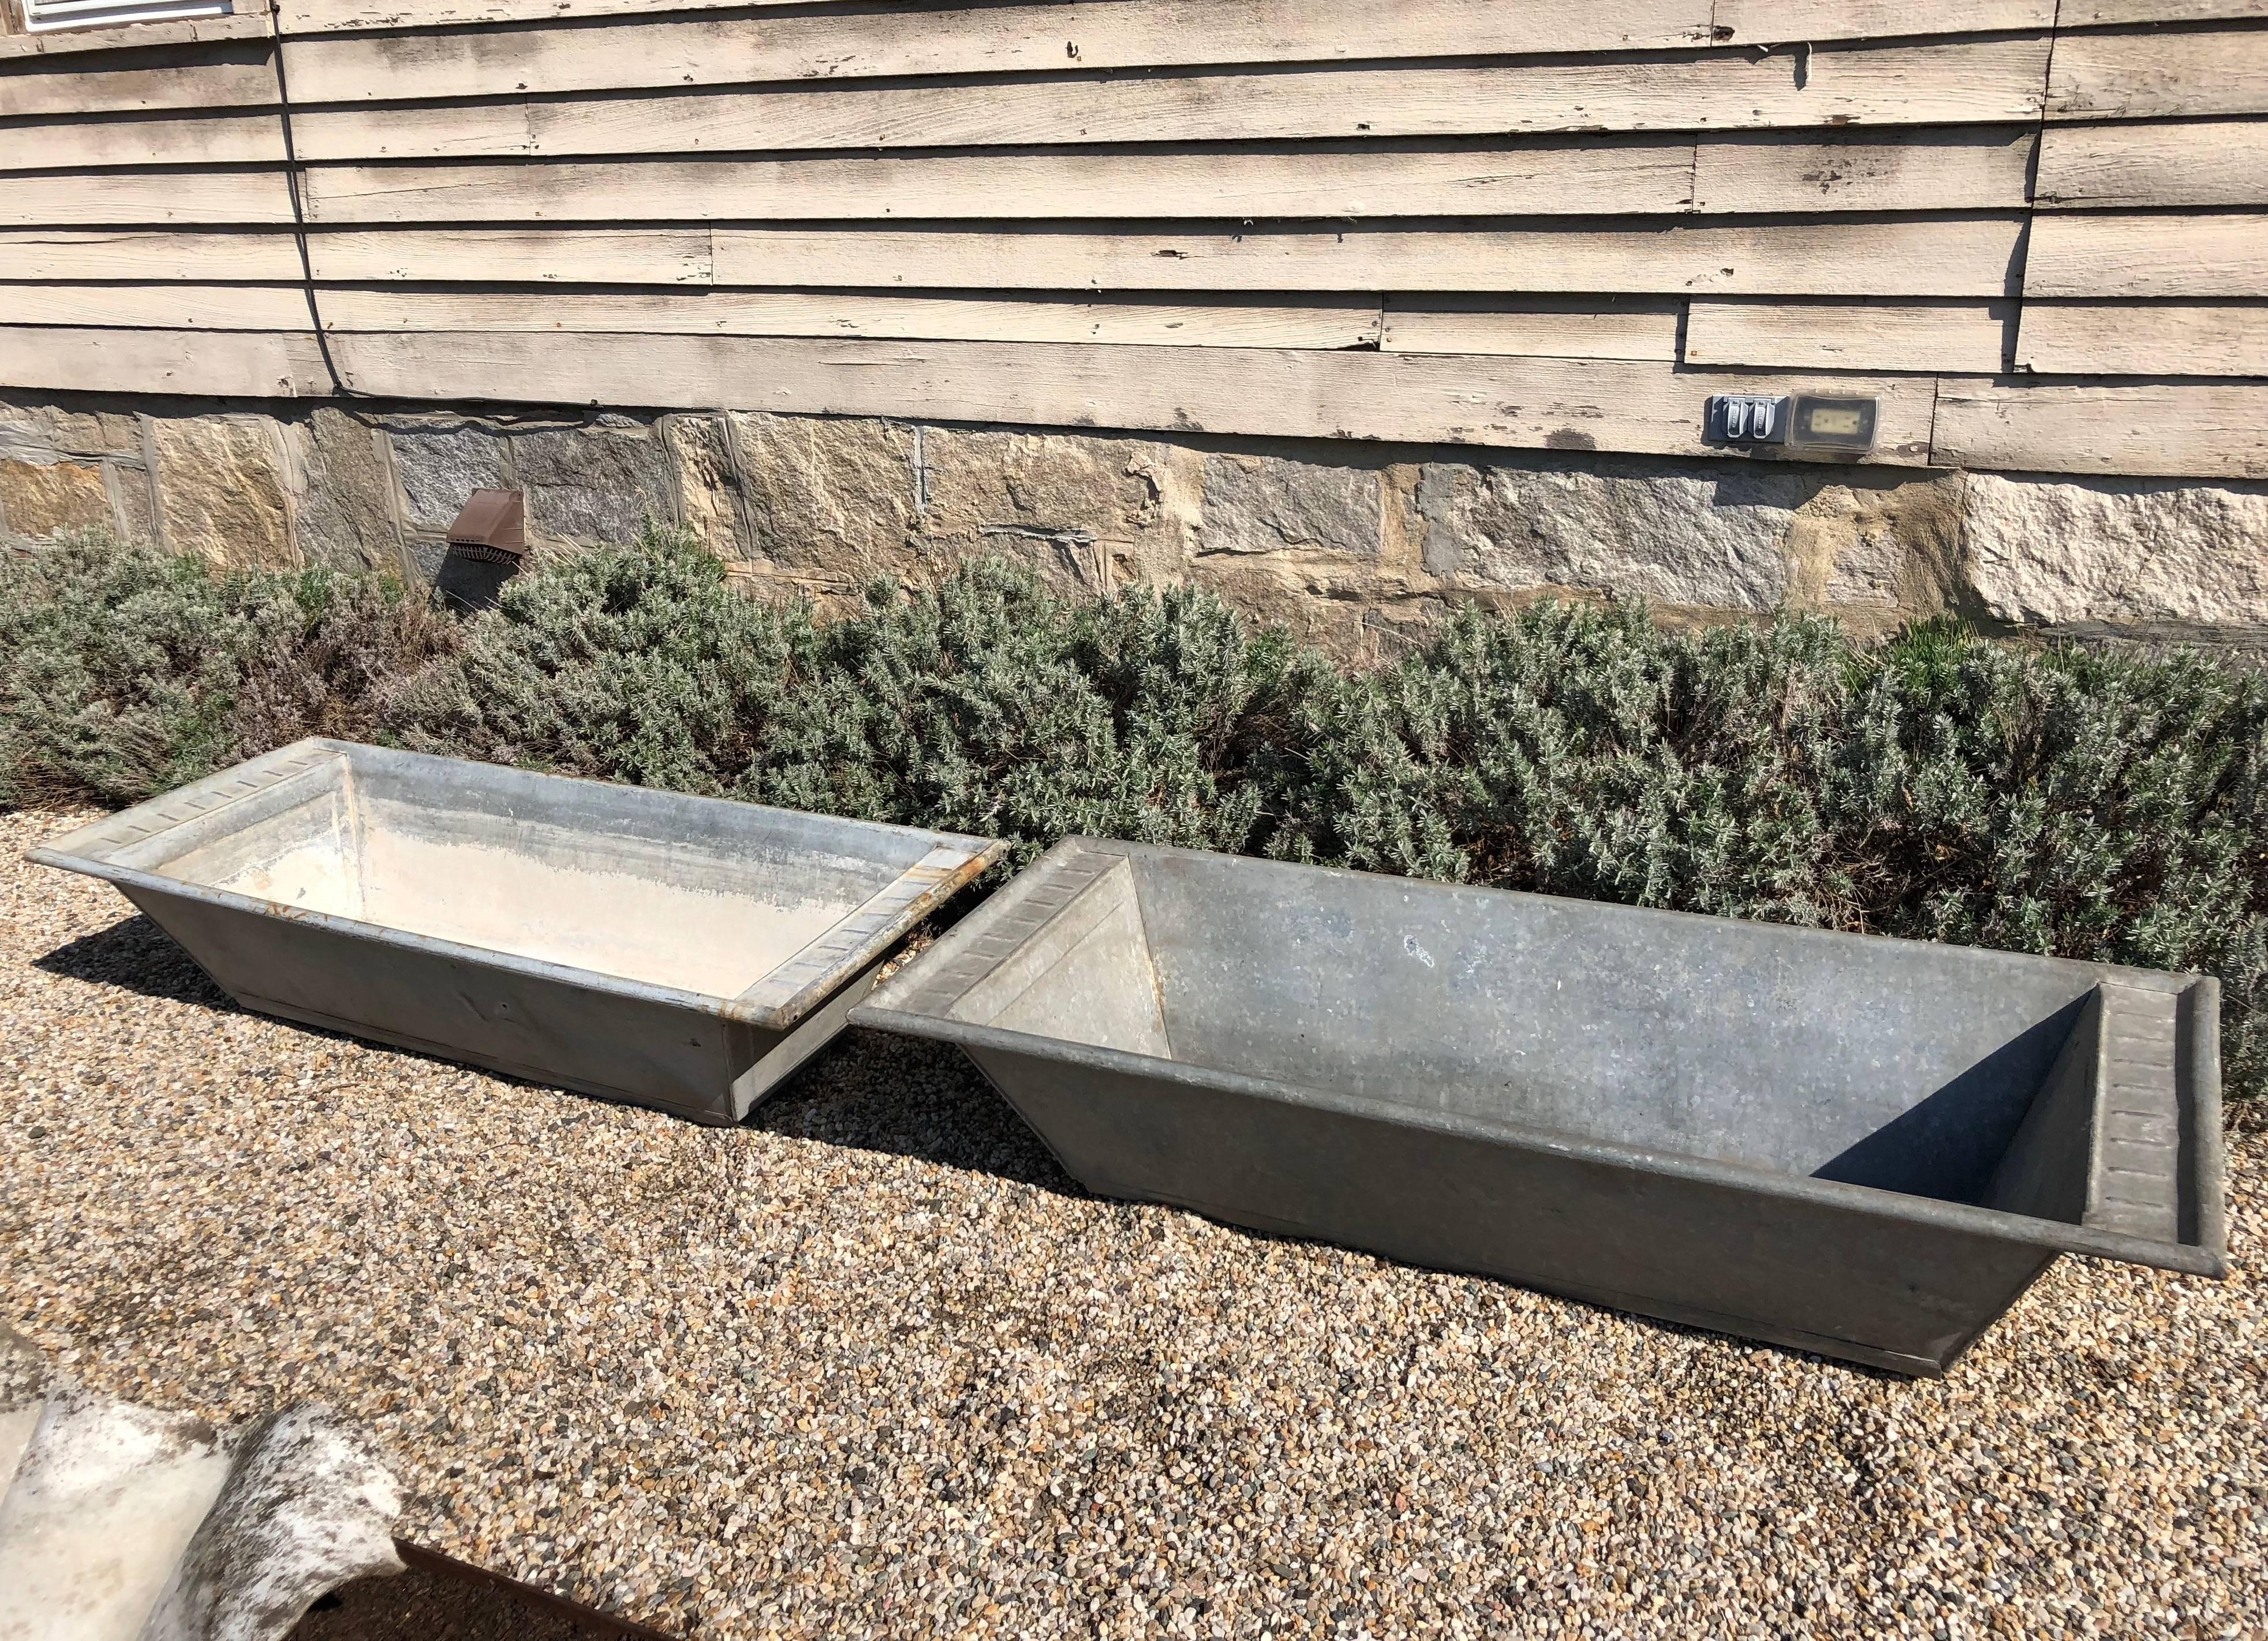 The clean industrial look of these troughs is softened by the ribbed decoration on each end and each sports four small v-shaped feet to raise them slightly off the ground. They would make an eye-catching display on a terrace or flanking a large